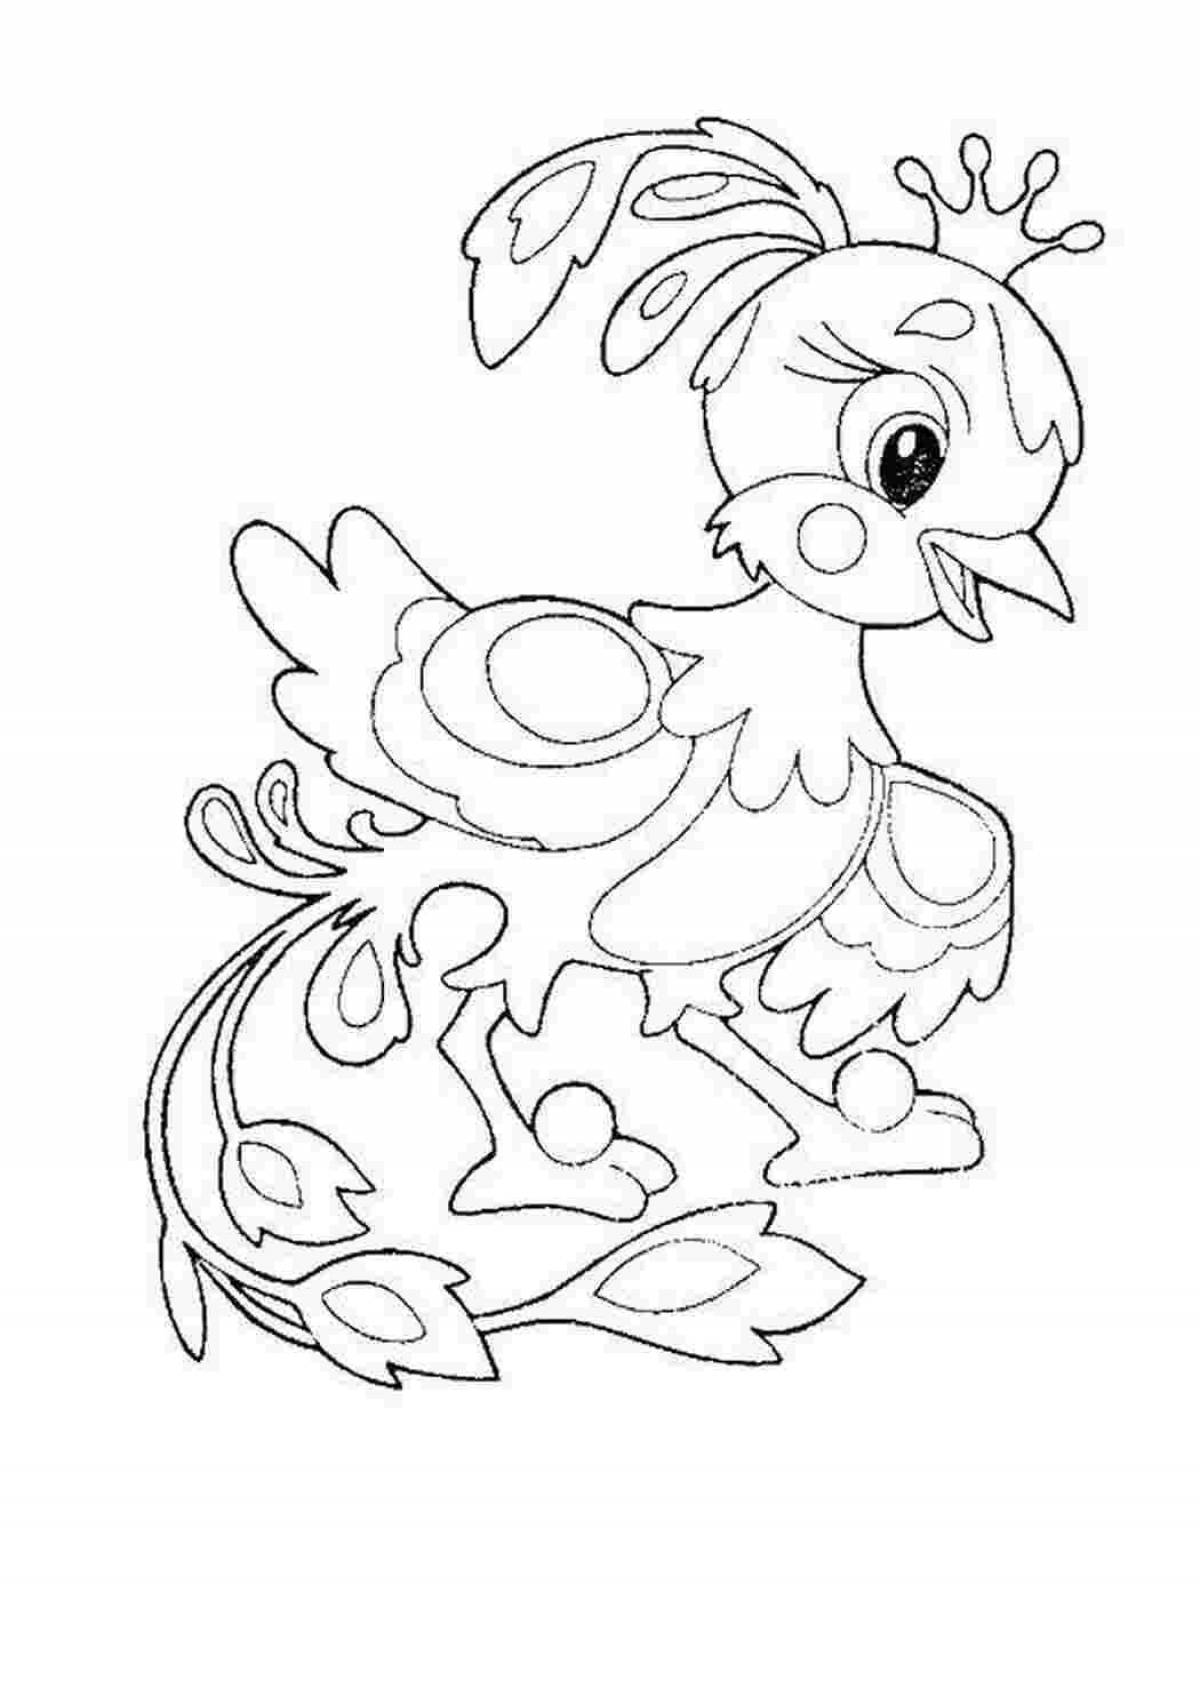 Amazing firebird coloring page for kids